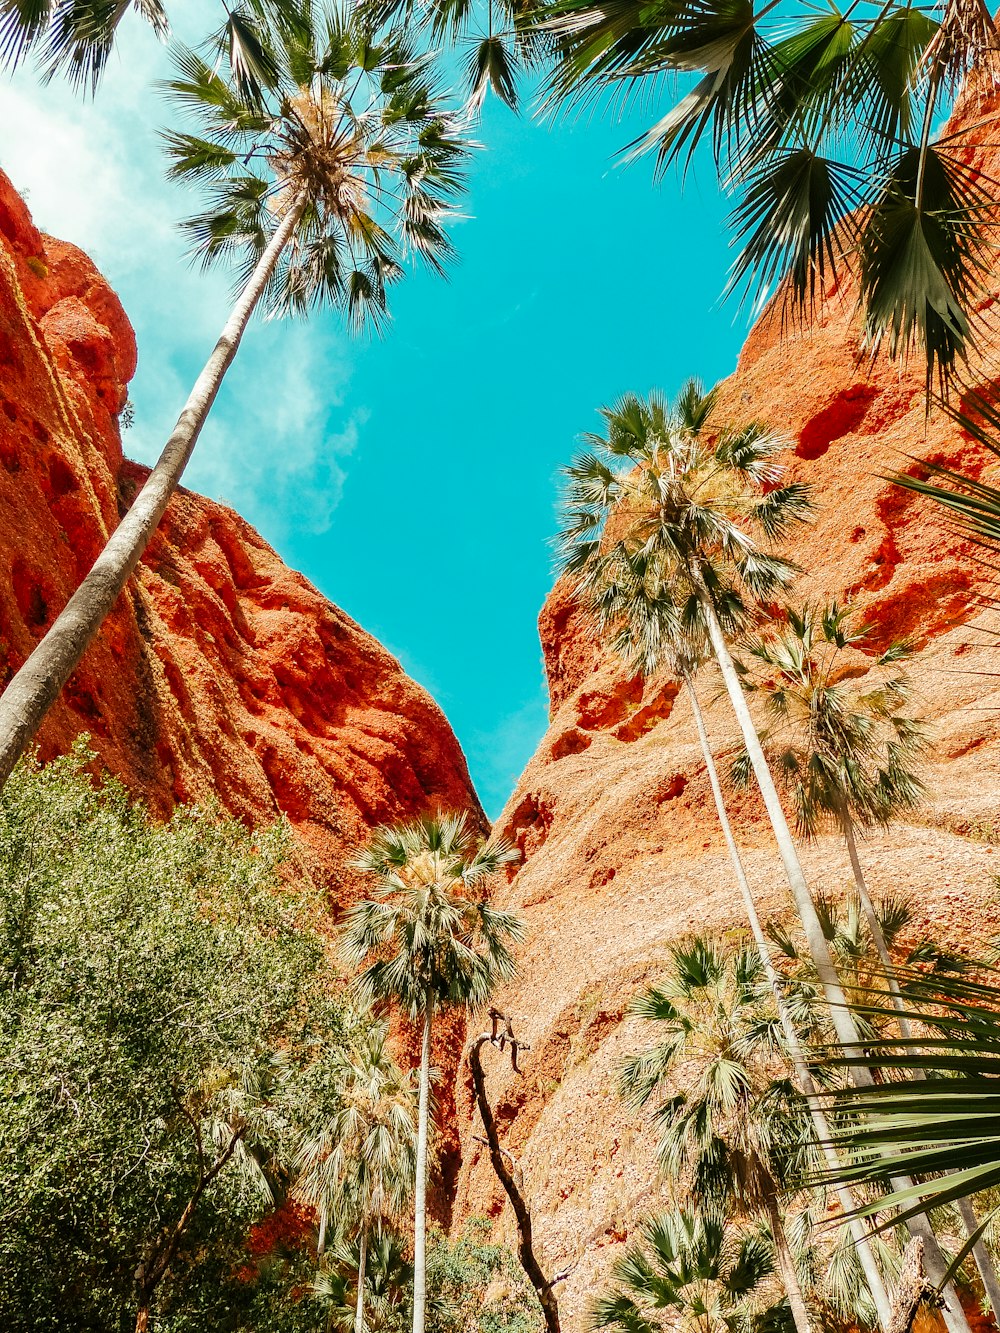 palm trees stand in front of a red rock formation